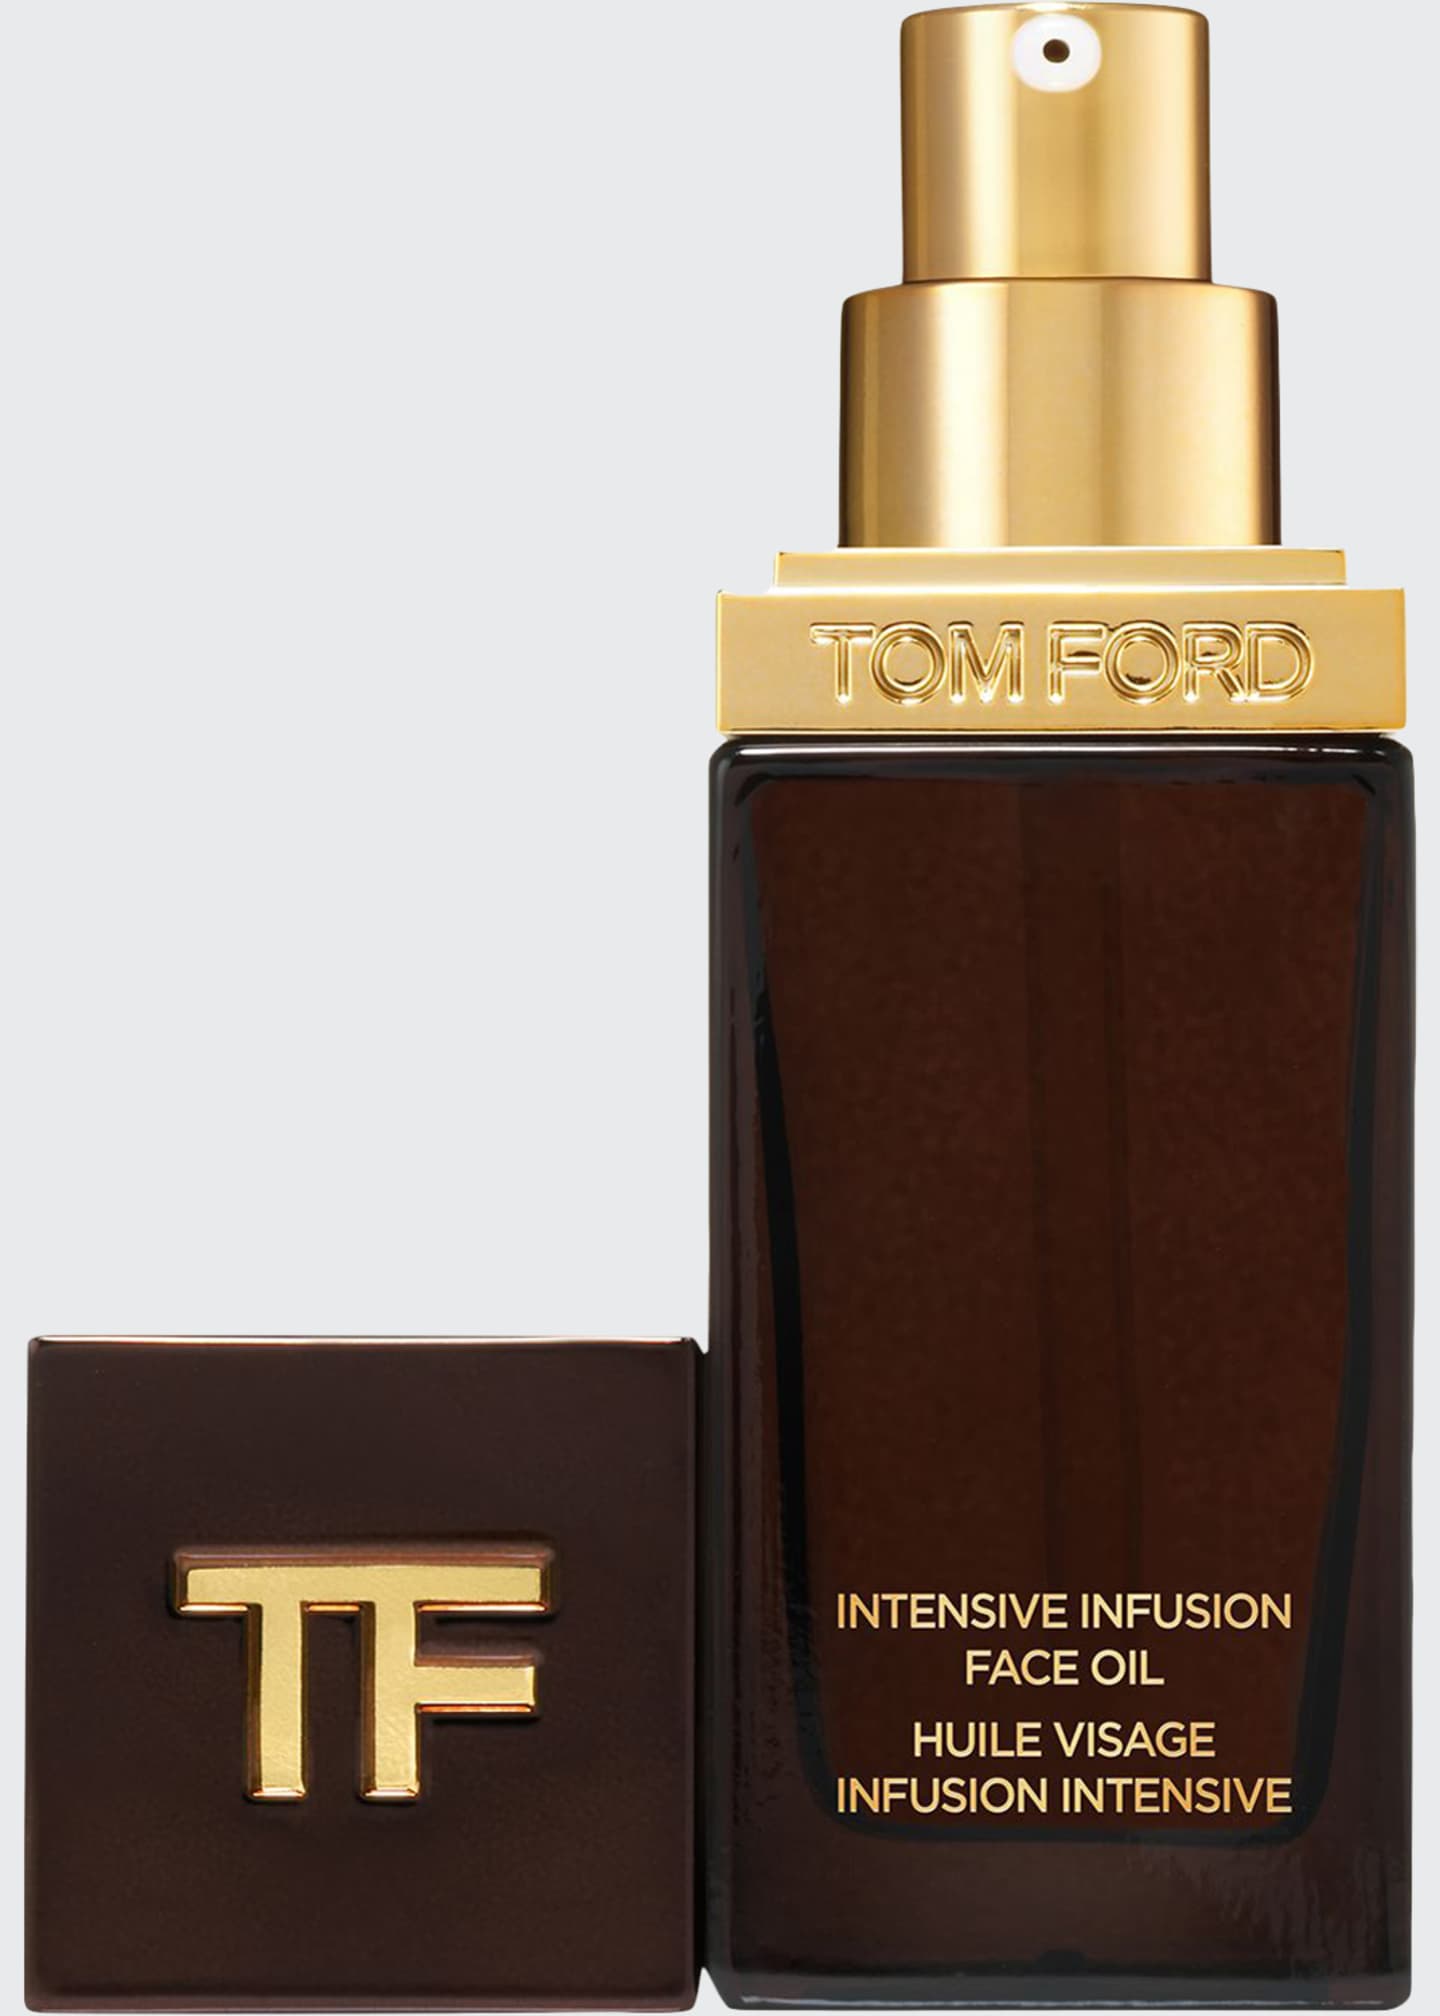 TOM FORD Intensive Infusion Face Oil, 1 oz. - Bergdorf Goodman